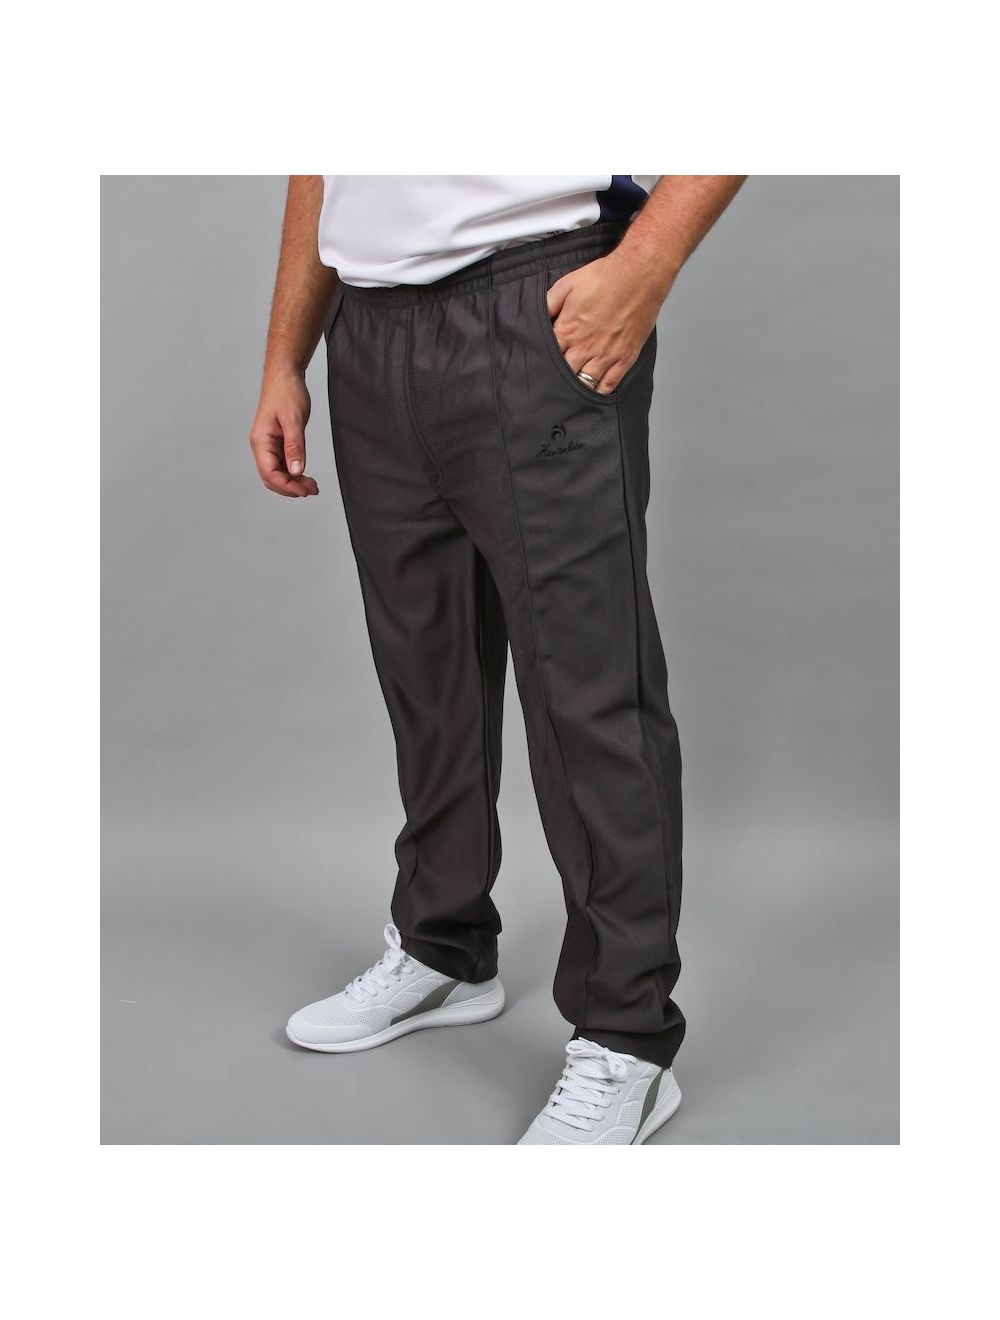 Buy Arrow Sports Mid Rise Solid Casual Trousers - NNNOW.com